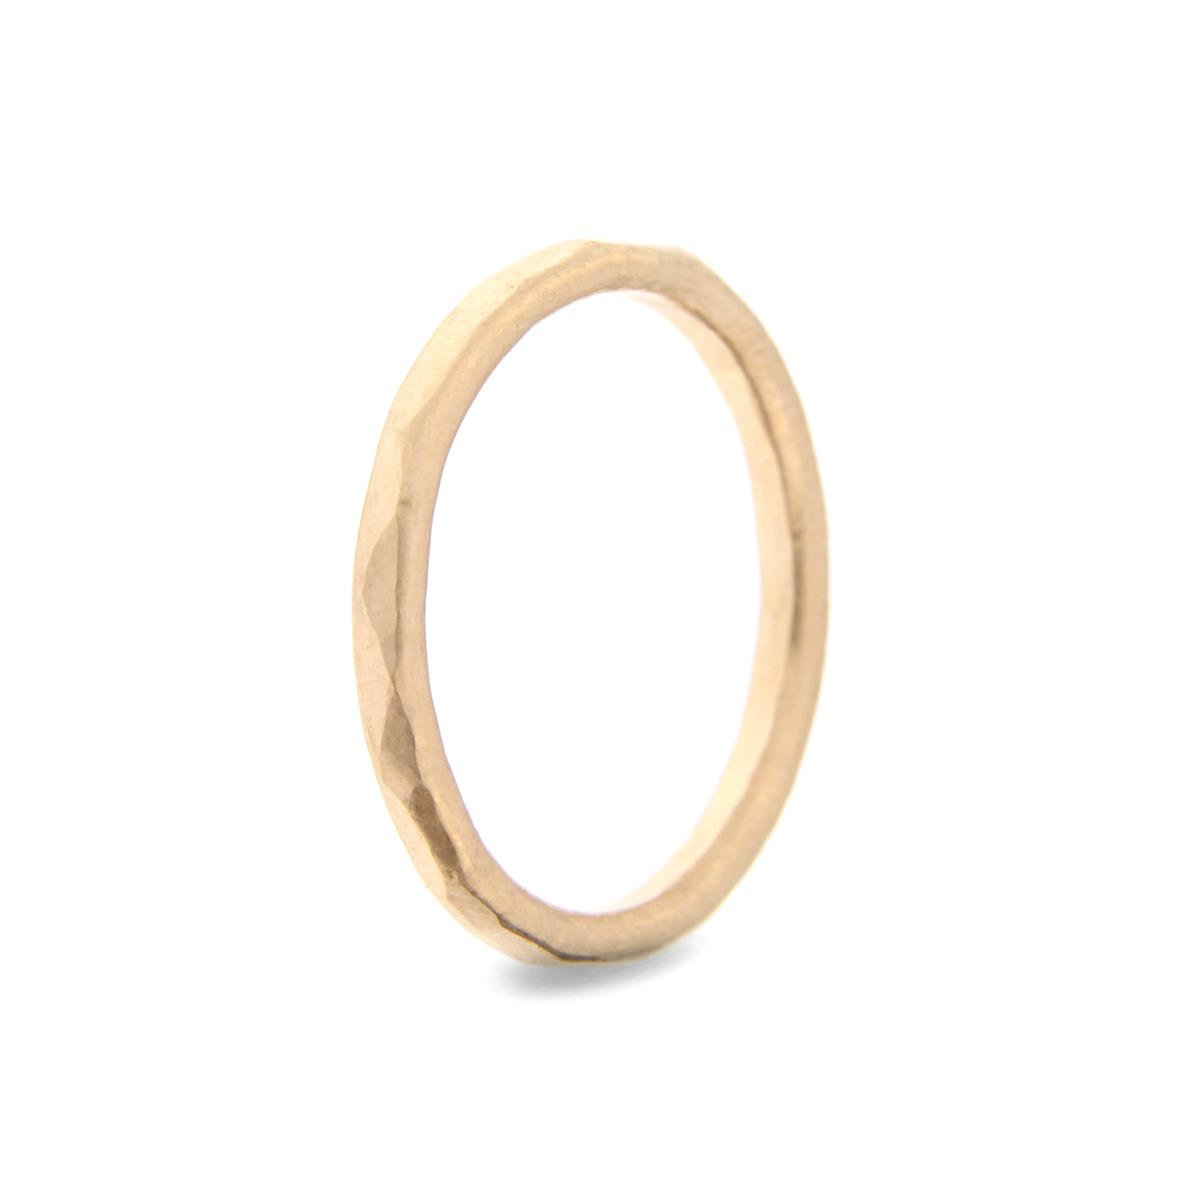 Katie g. Jewellery - Hammered Ring 2,0mm - Rosé Gold